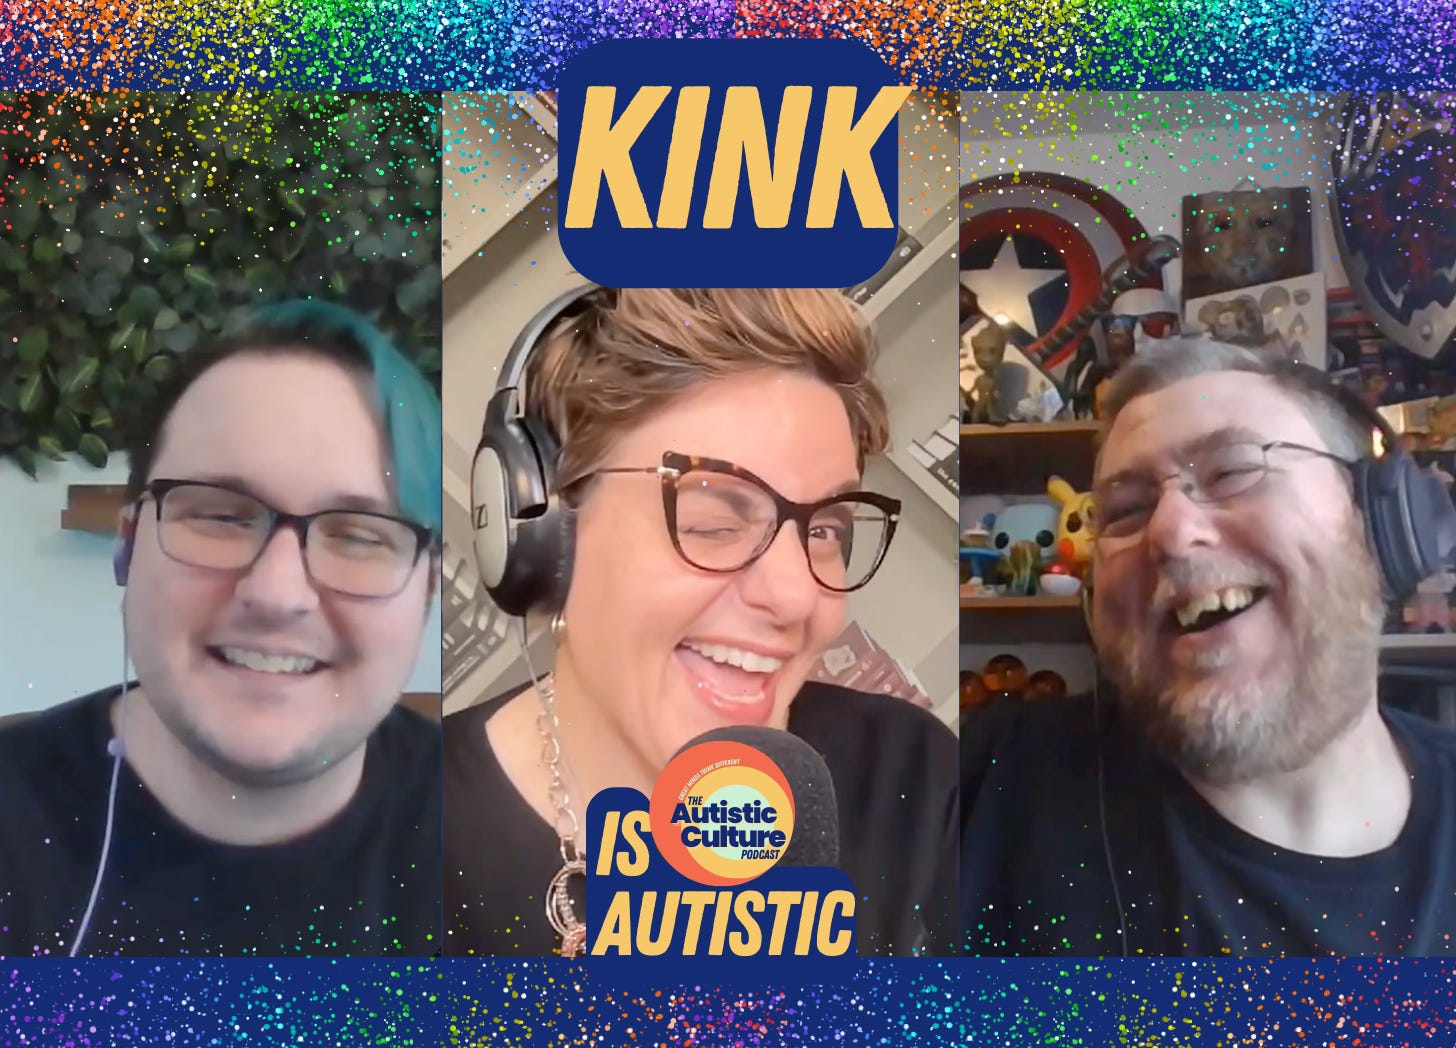 Matt Lowry, LPP, Dr. Angela Lauria, and Dr. Kade Sharp, recording a podcast. The text reads: Kink is Autistic. Rainbow glitter decorates the edges.